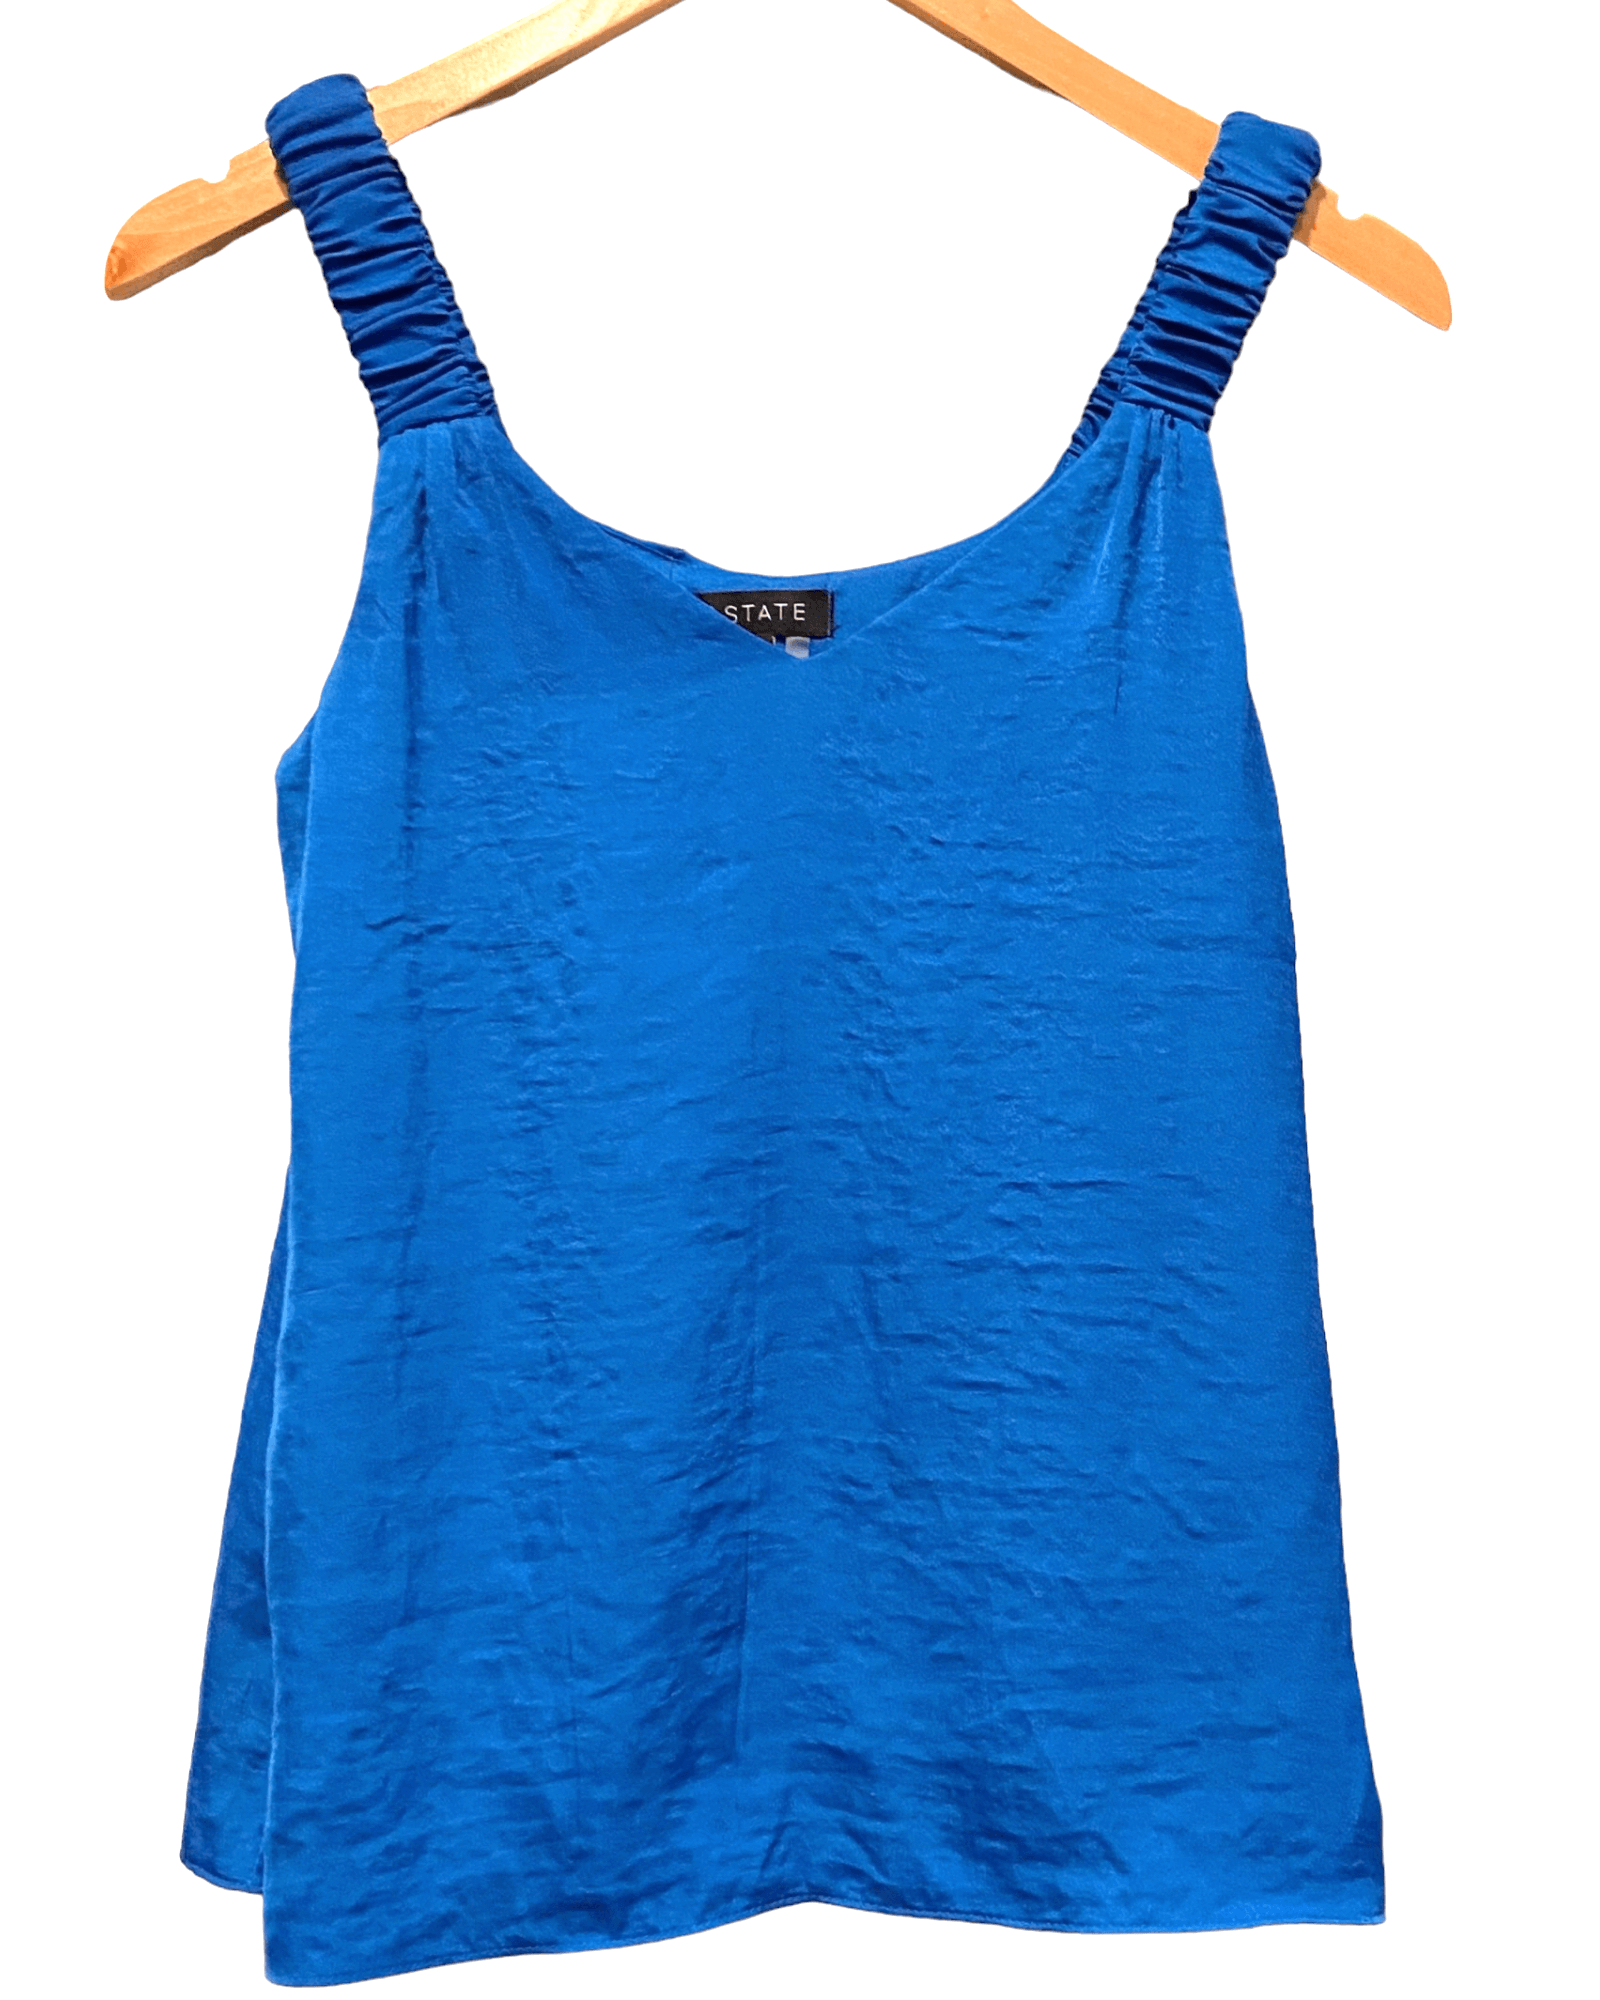 Warm Spring 1 STATE dragonfly blue stain tank top